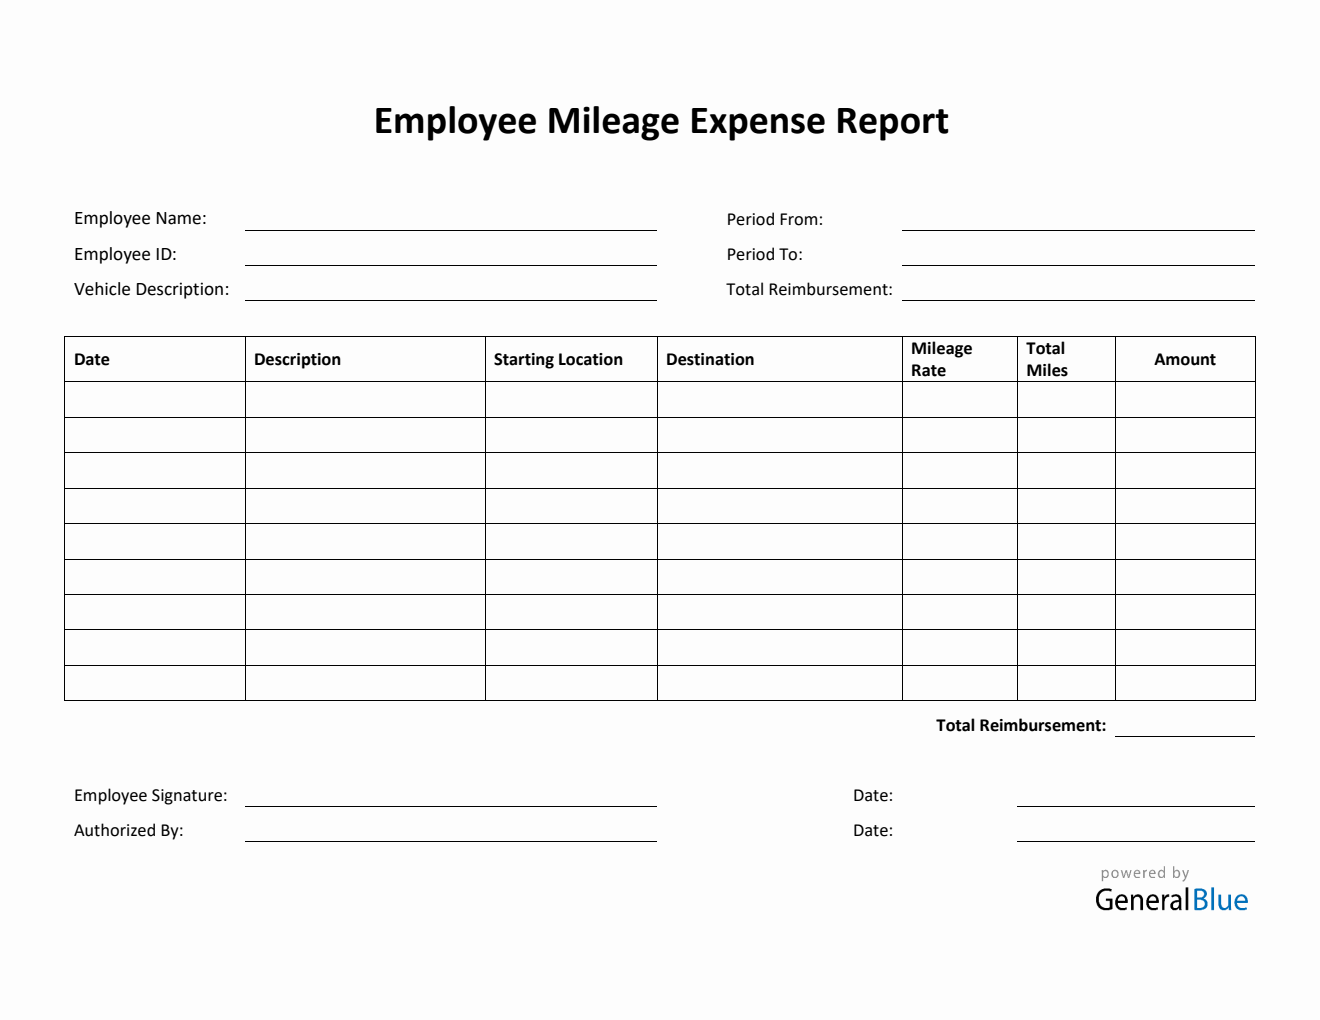 Printable Employee Mileage Expense Report Template in PDF